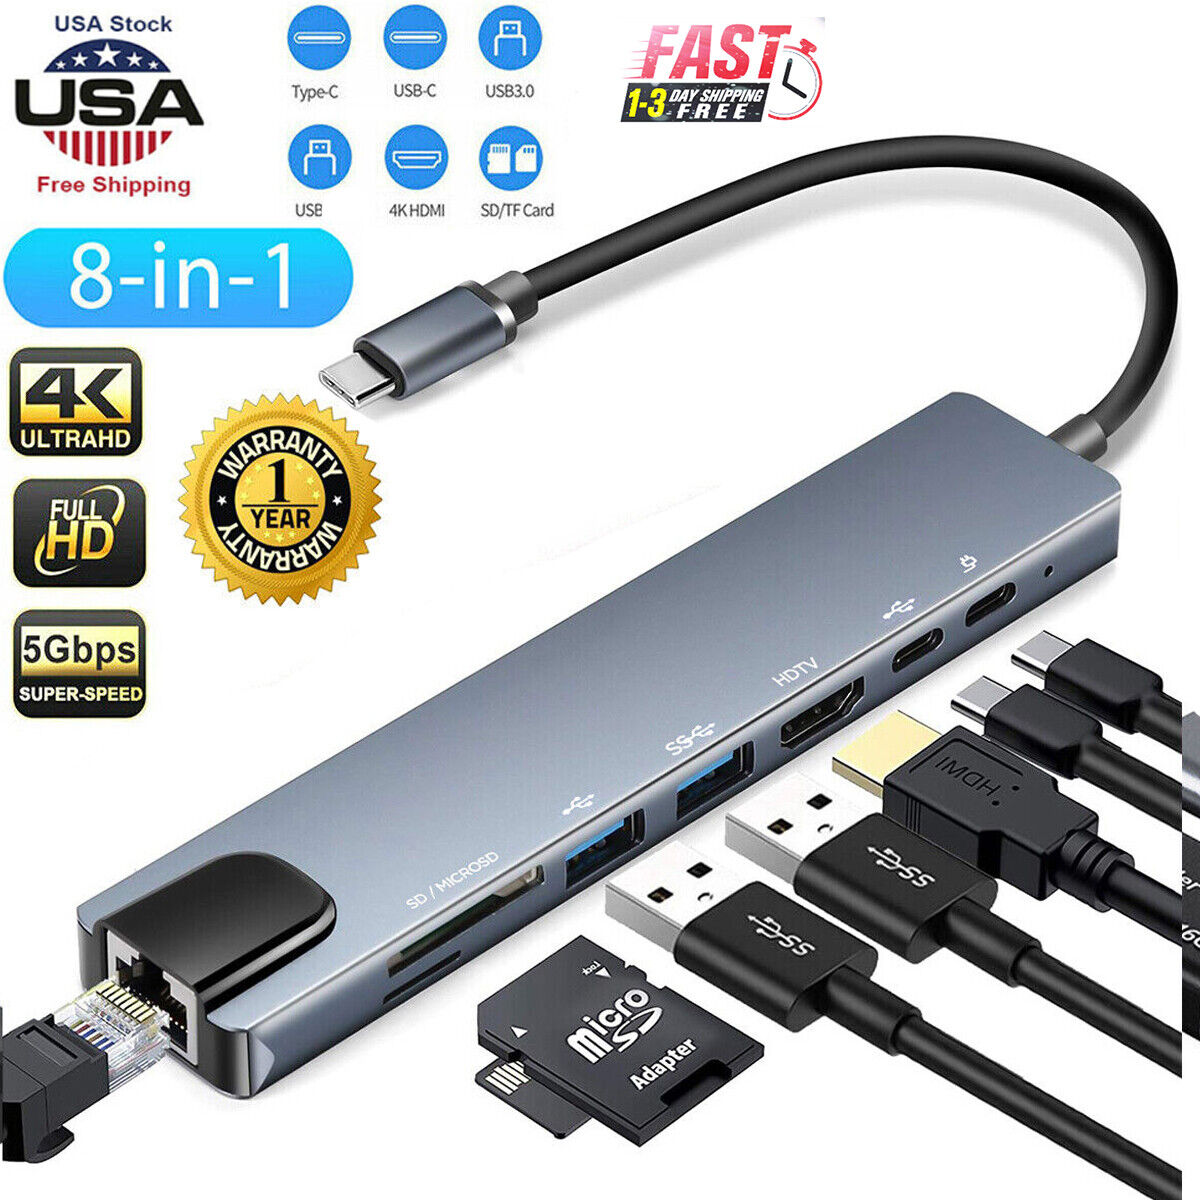 Multiport Type C USB 3.0 HUB to 4K HDMI Adapter SD/TF Card Reader For Macbook